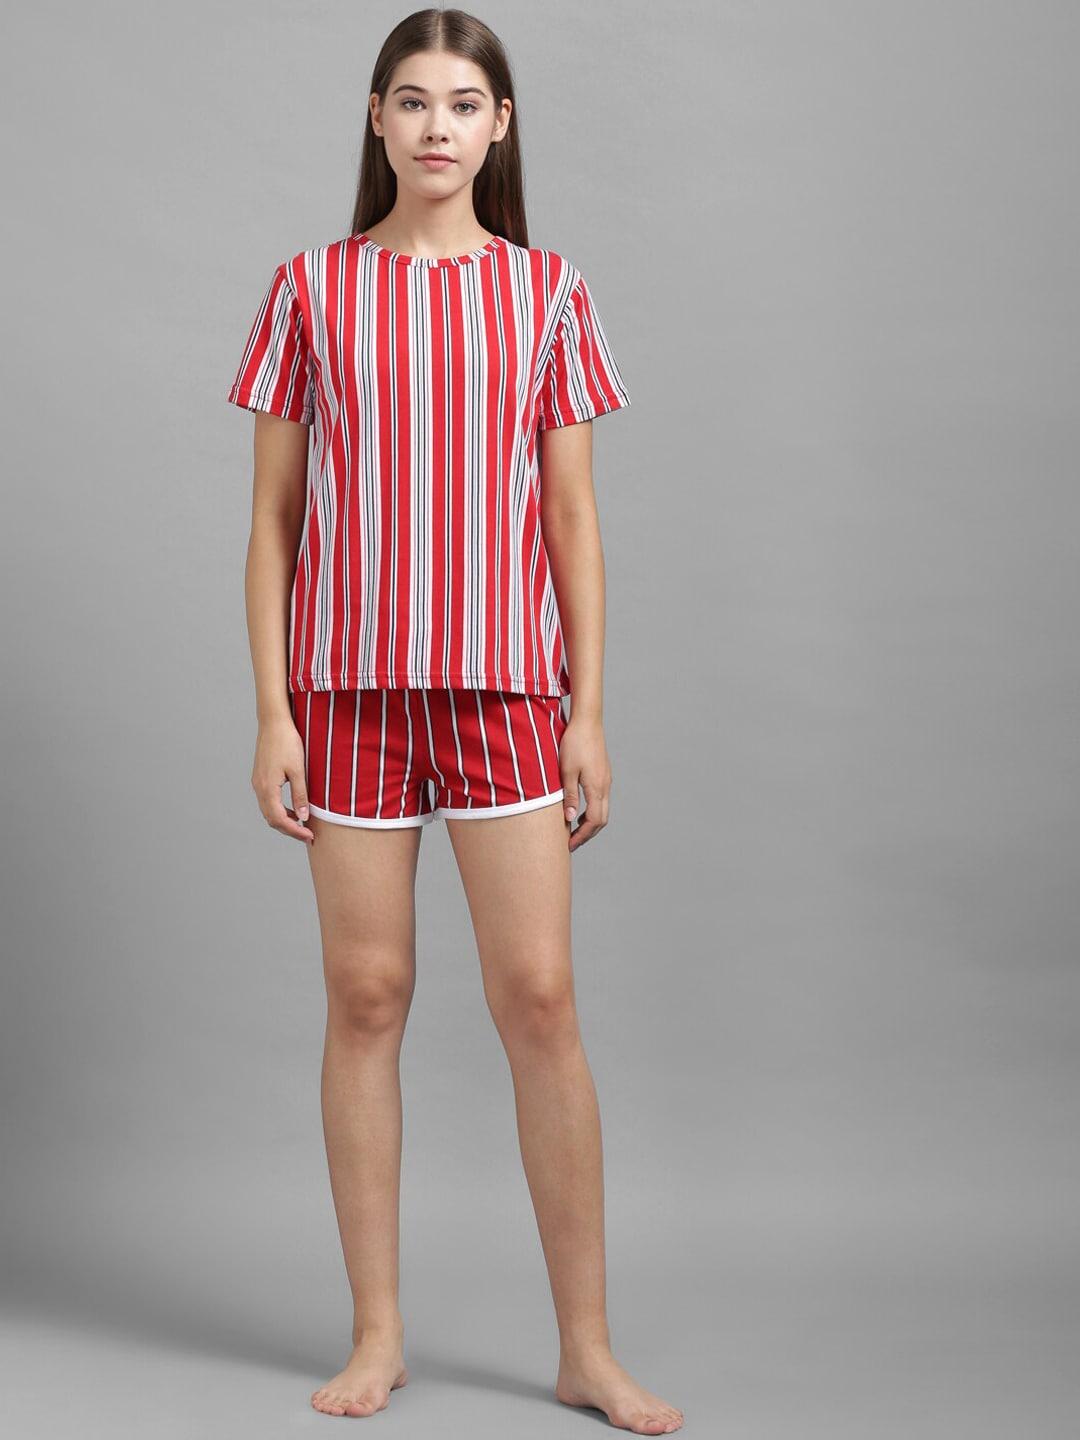 kotty women red & white striped night suit